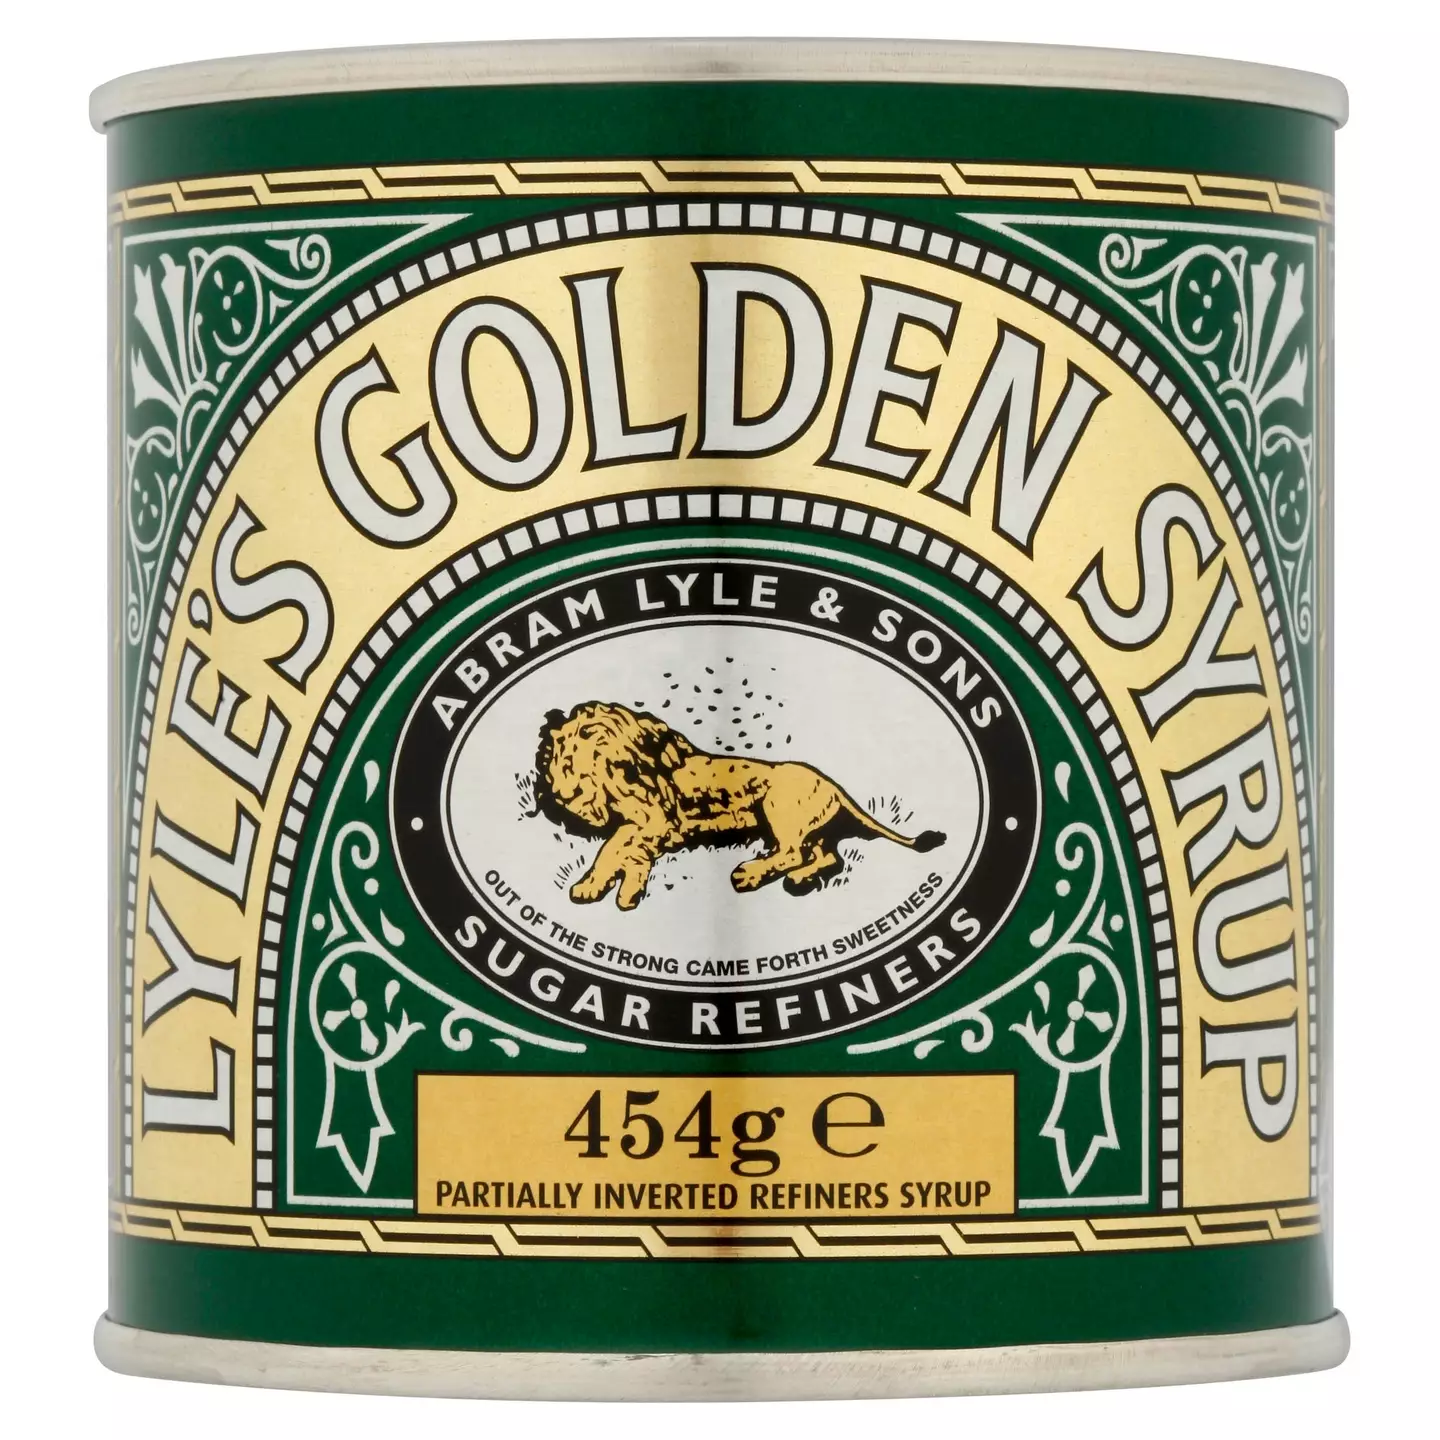 The Lyle's golden syrup tin has remained unchanged for decades.